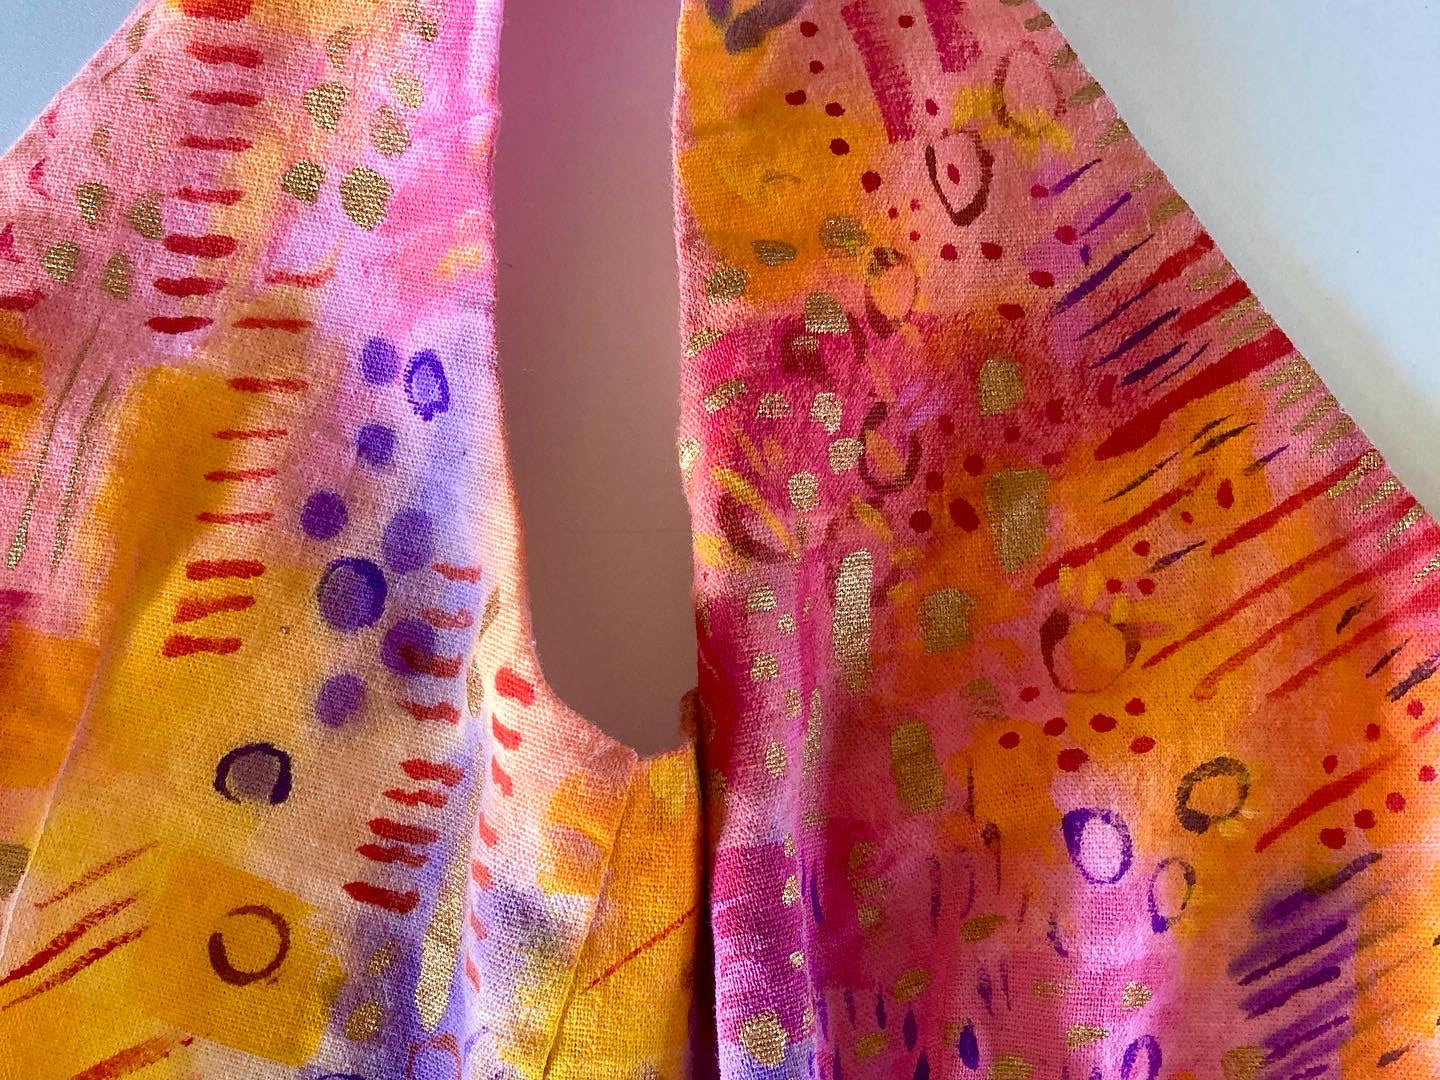 A piece of handpainted clothing. It is in yellow/orange/red/purple/pink washes with purple/red/gold abstract detailing in lines, circles and dots. 